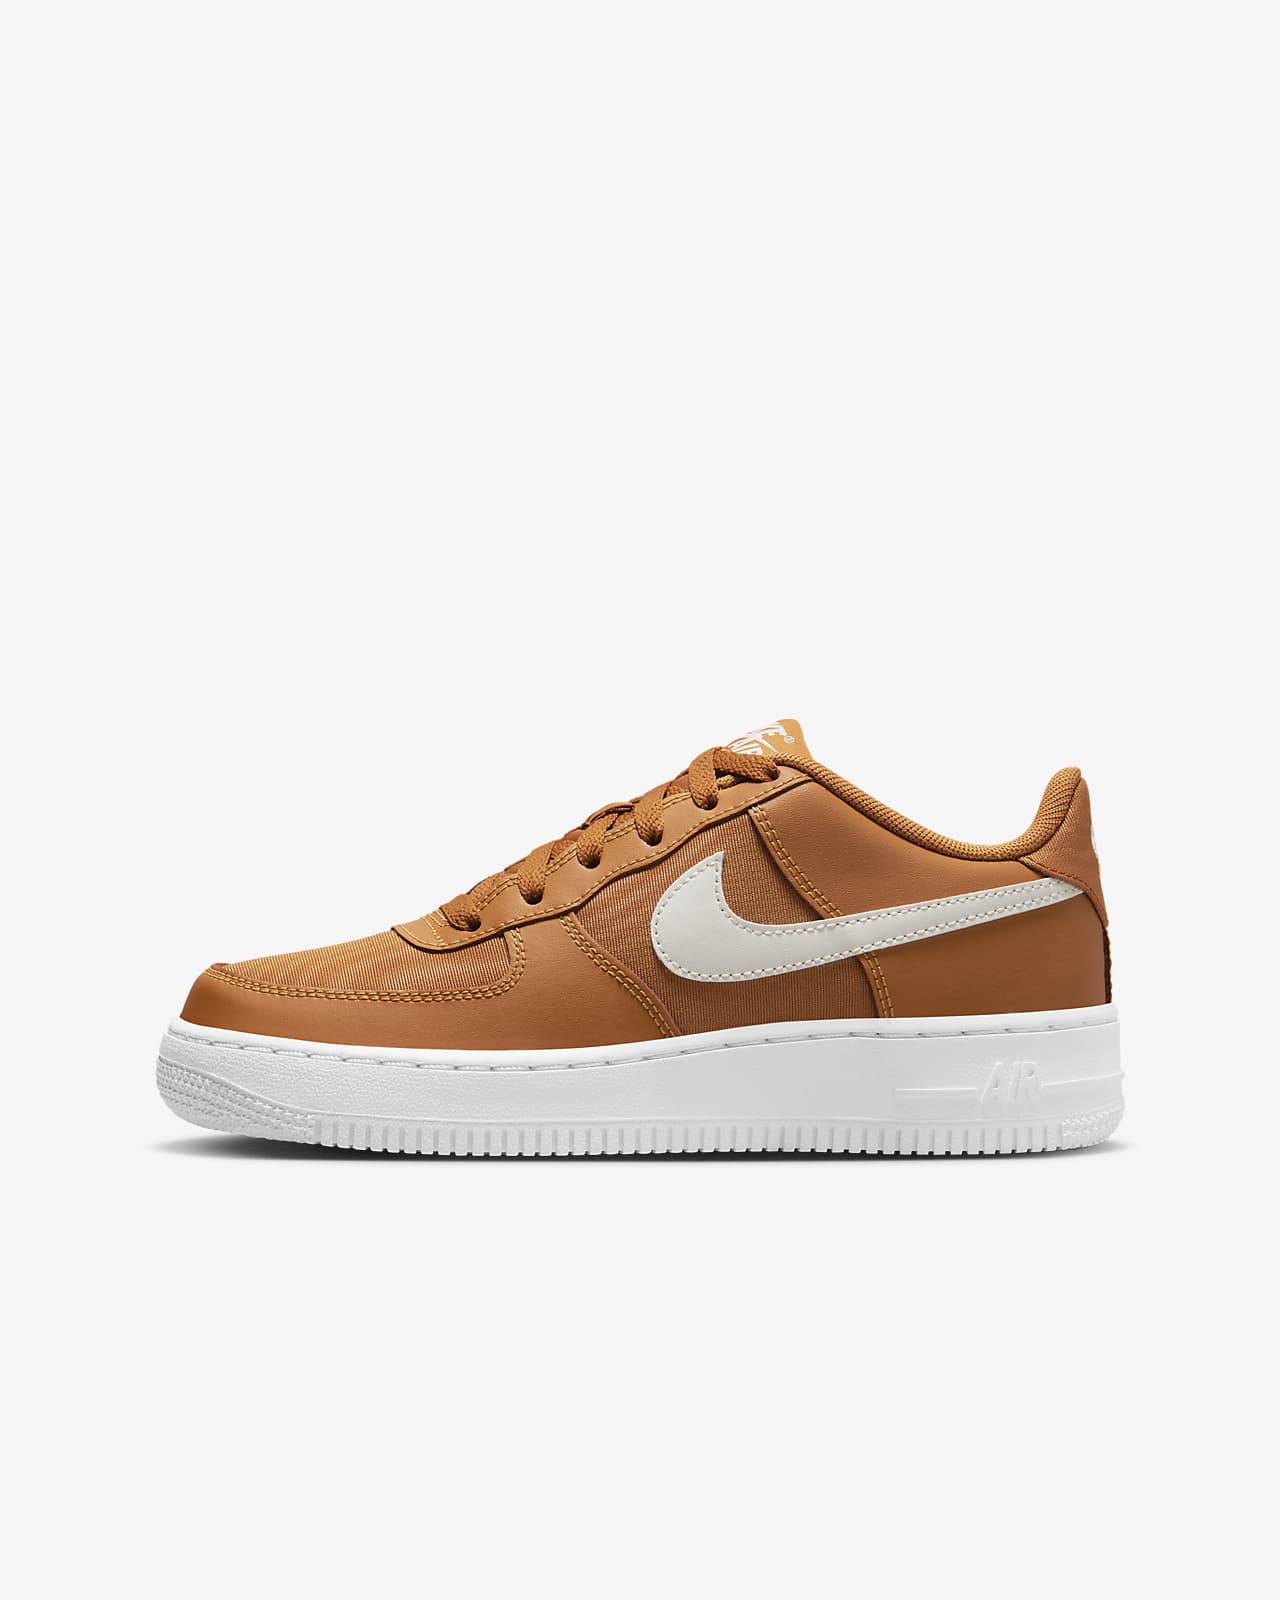 Shoes Nike AIR FORCE 1 07 LV8 2